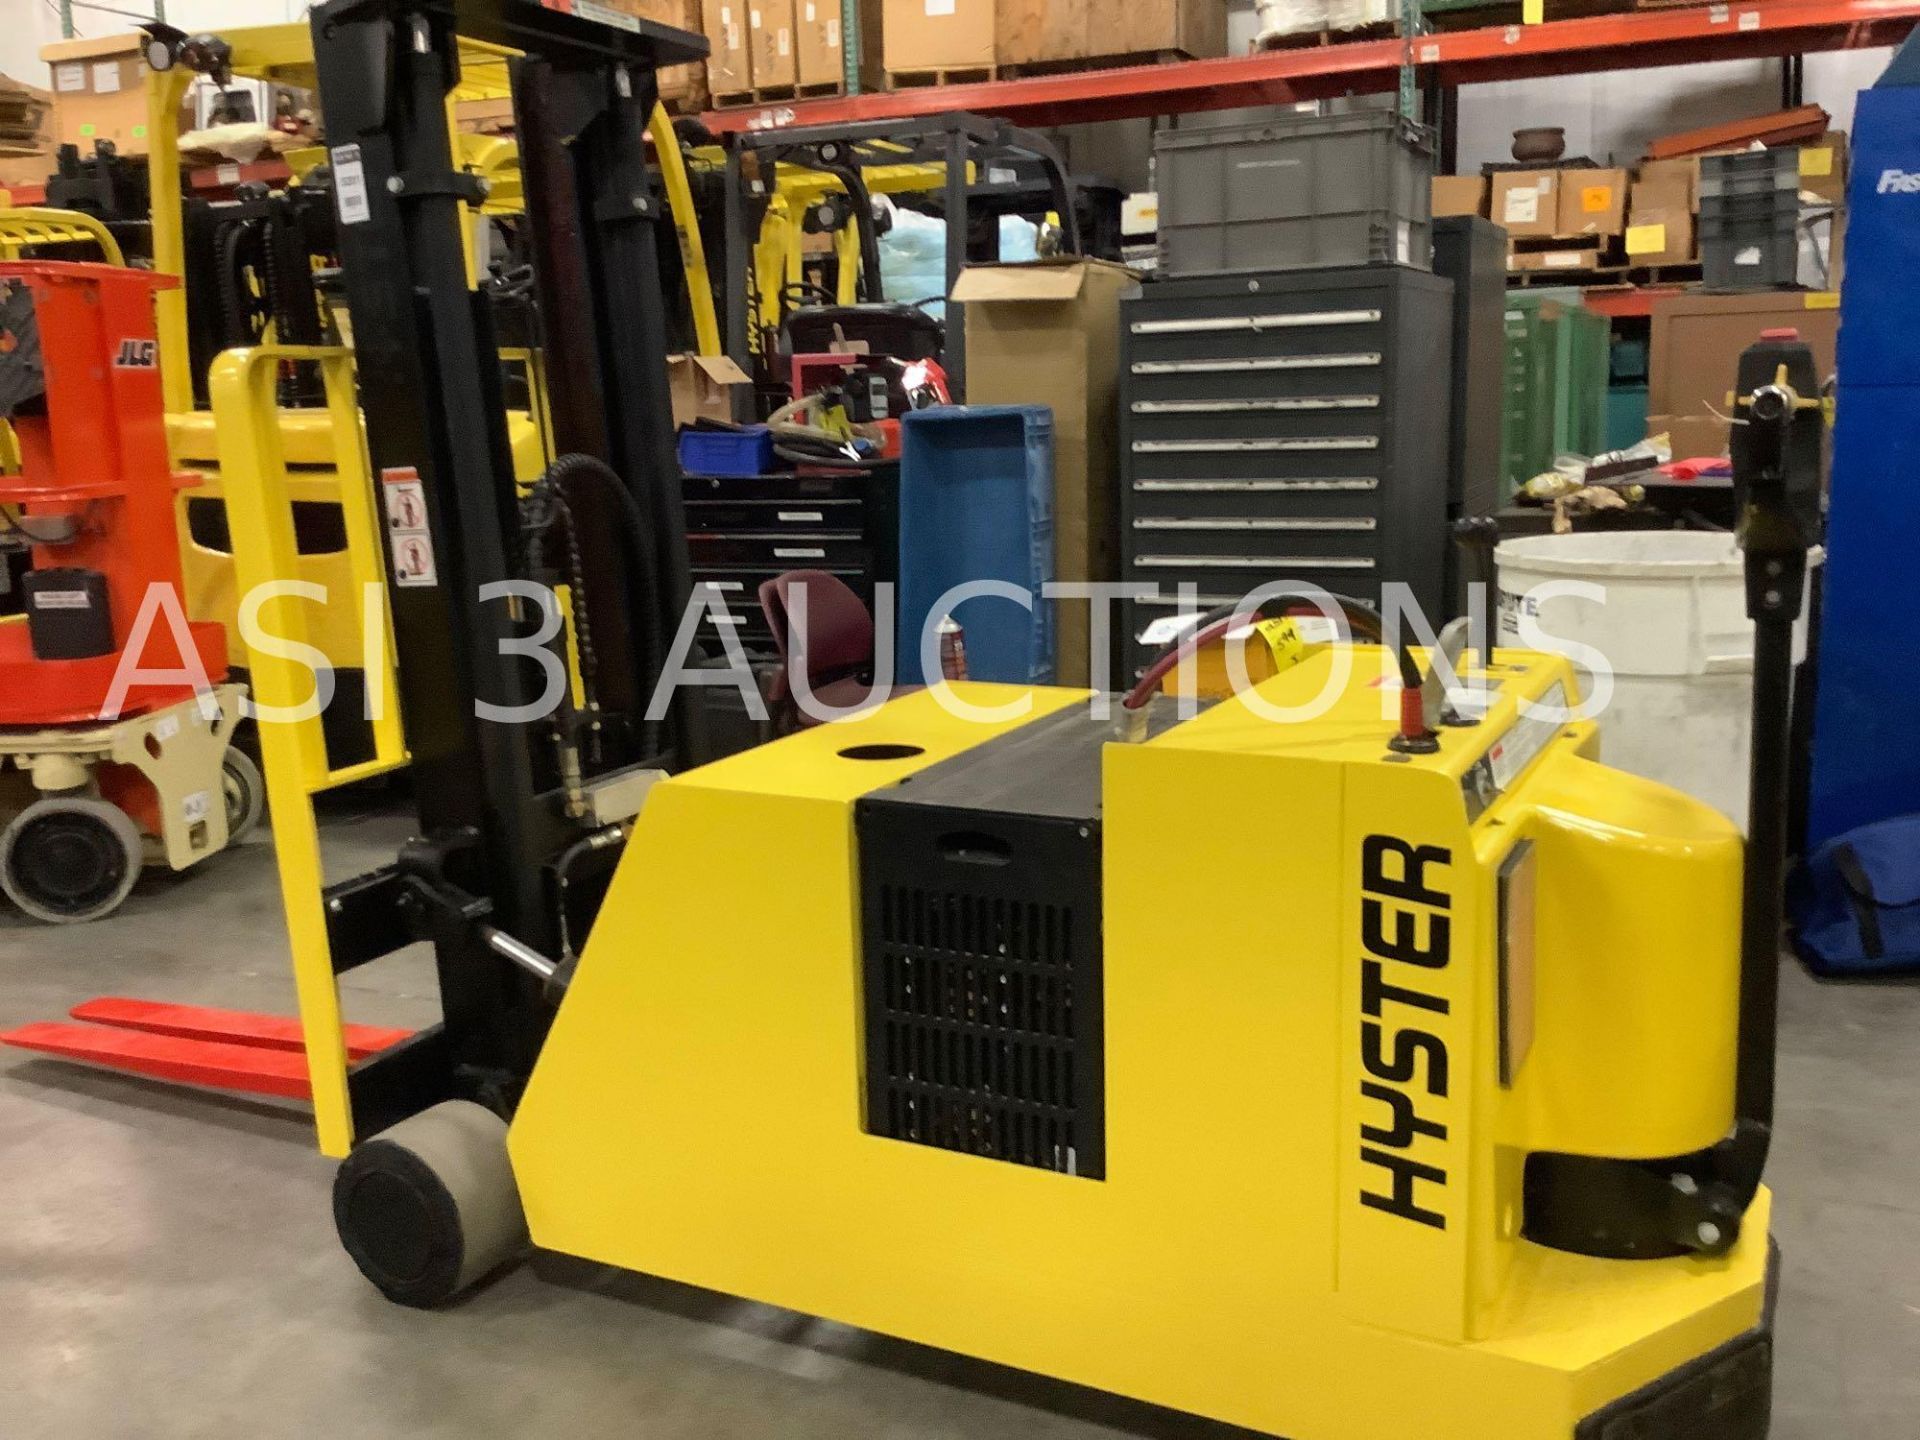 HYSTER FORK LIFT TILT TRUCK MODEL W40XTC MAX CAPACITY 4000lbs LOAD HEIGHT 104.5 RUNS & OPERATES - Image 5 of 9